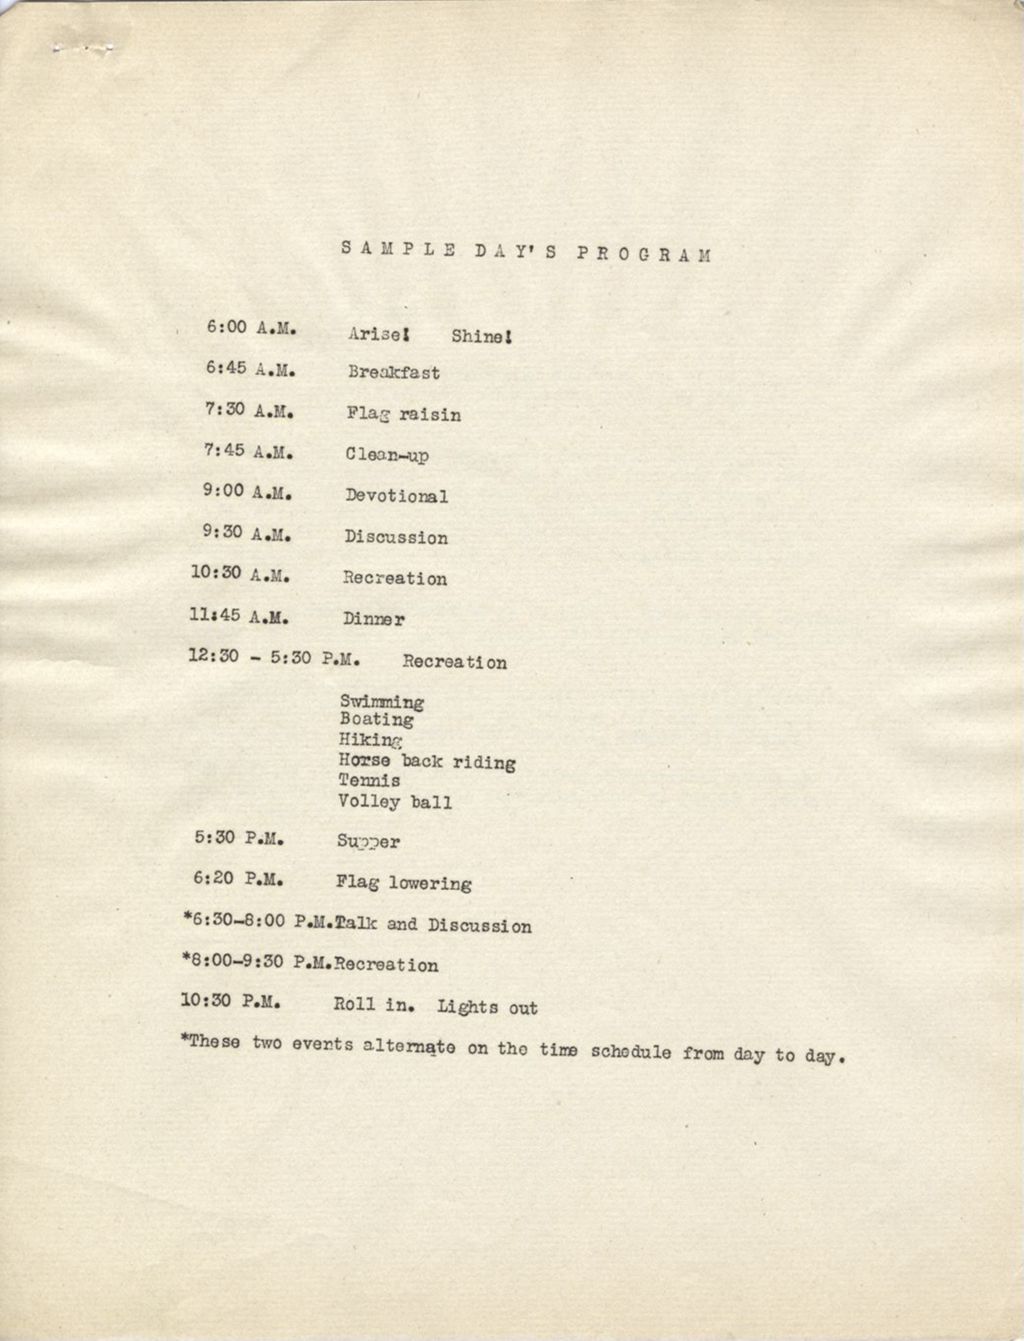 Conference program of lectures at Camp Gray, p. 2